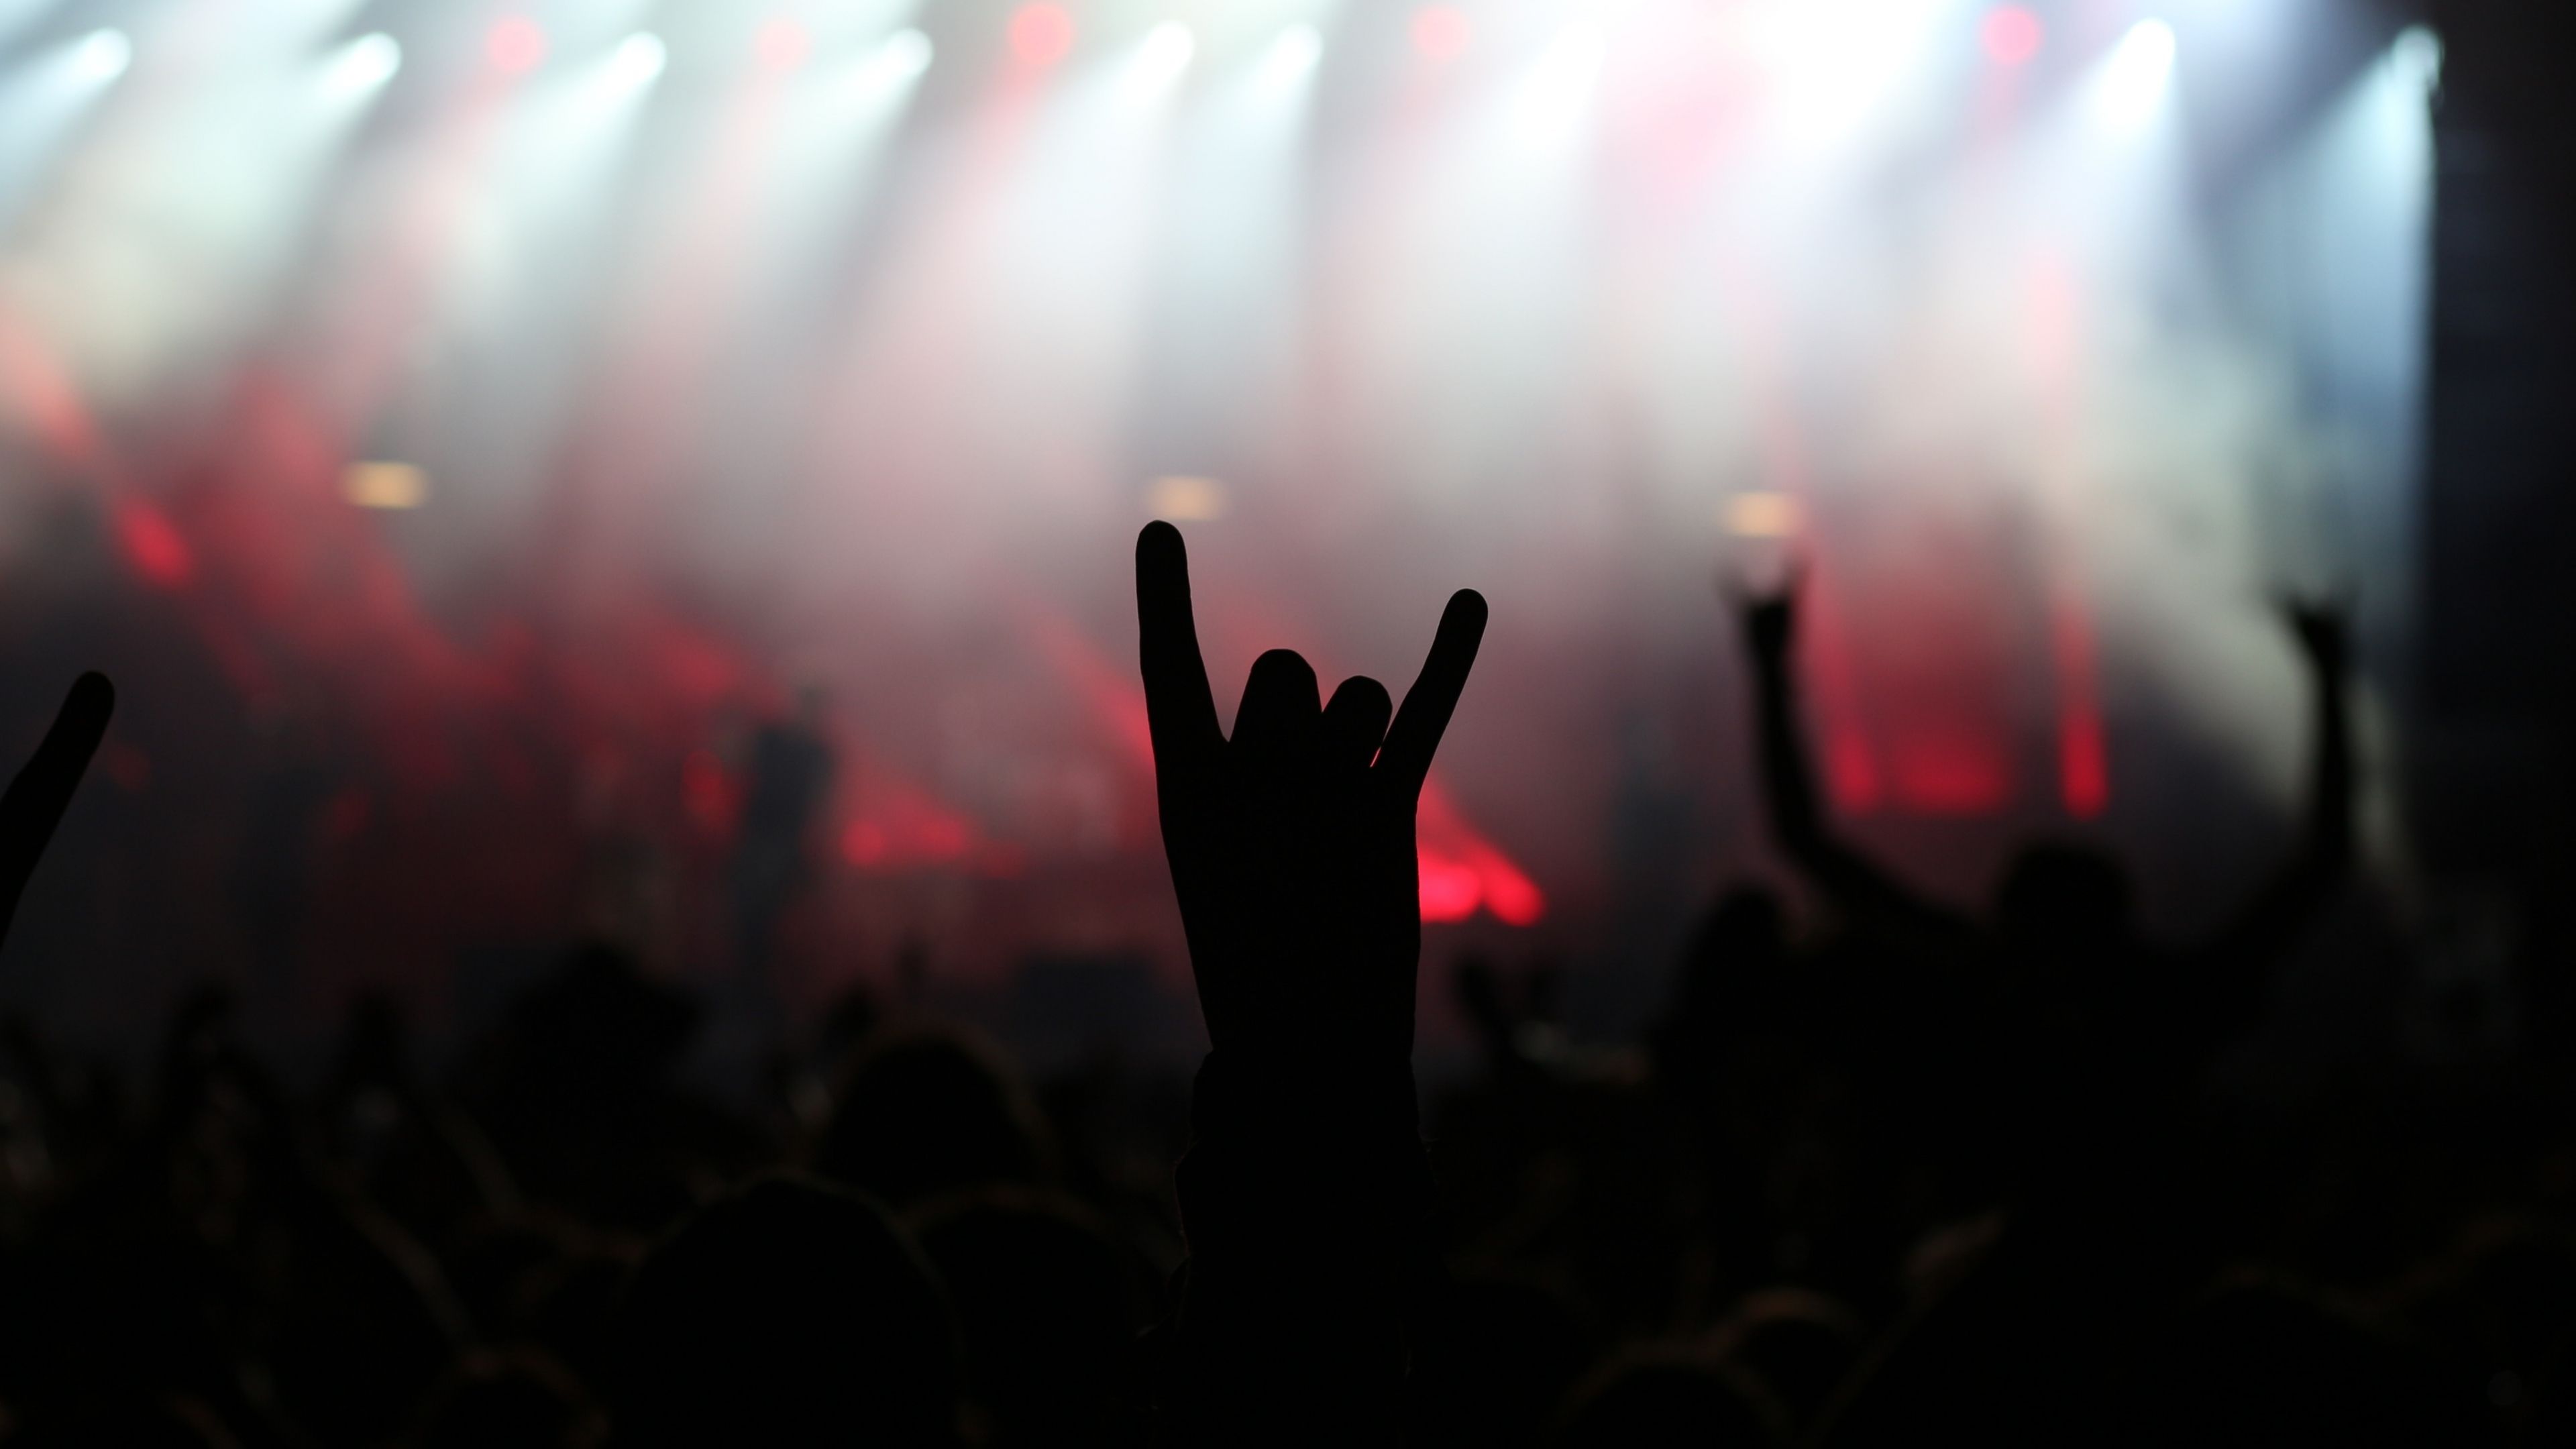 Download 3840x2160 wallpaper rock party, music concert, dance, hands, party, 4k, uhd 16: widescreen, 3840x2160 HD image, background, 411